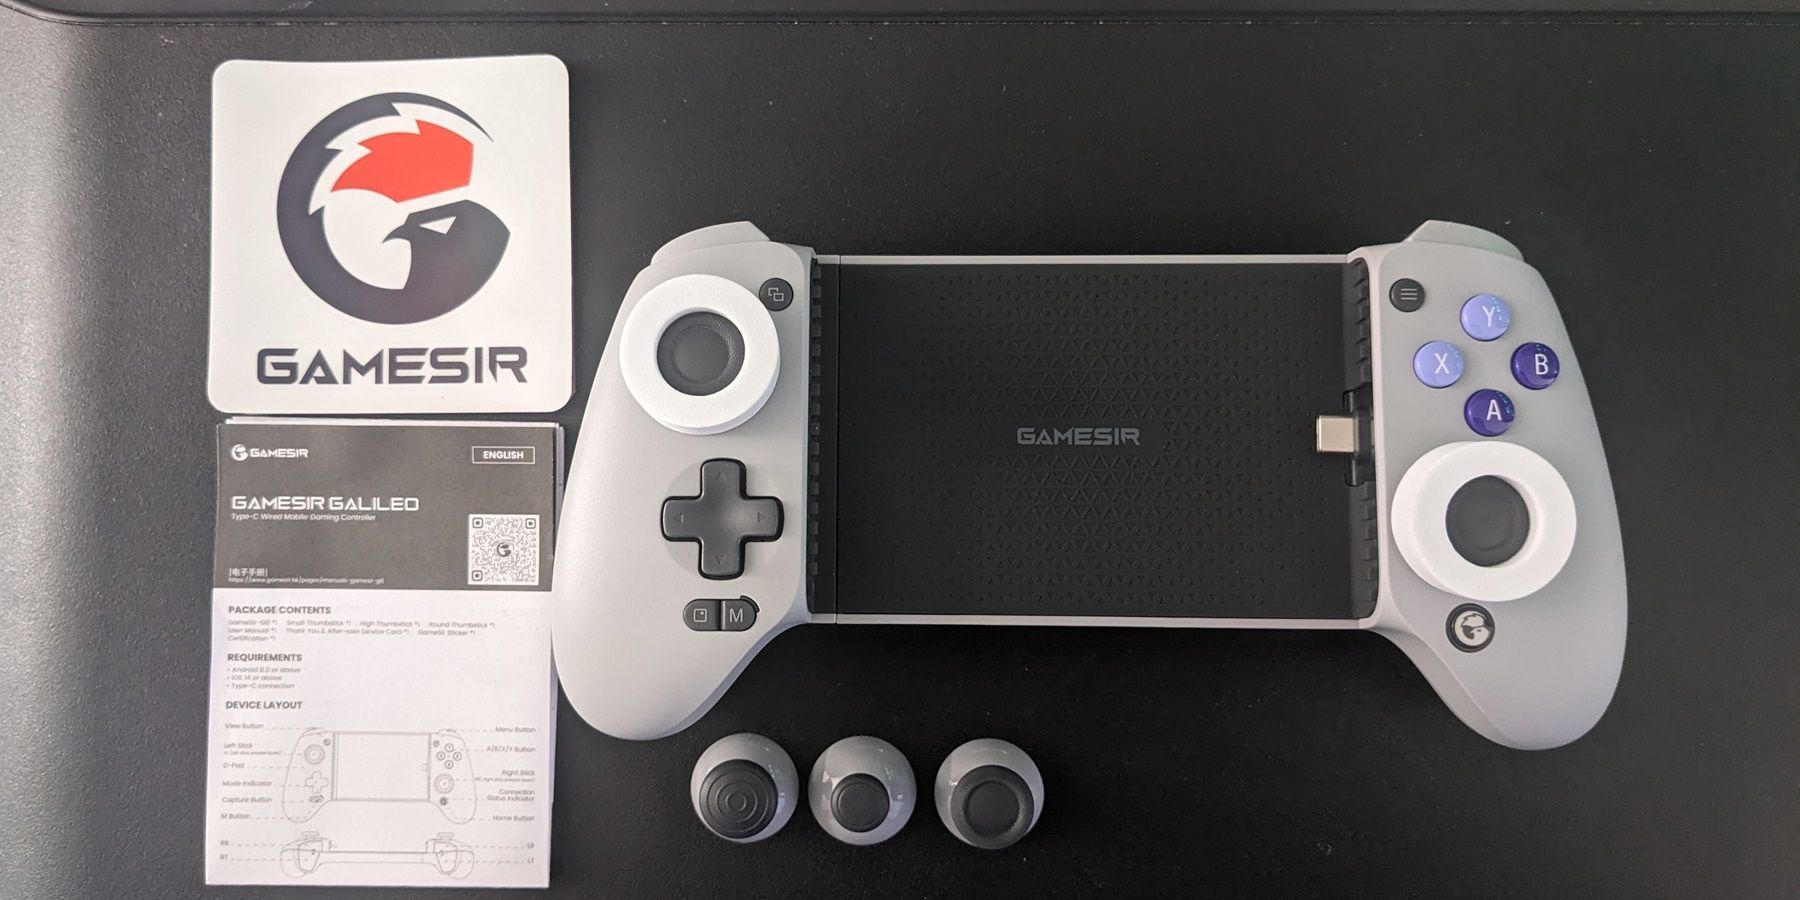 GameSir G8 Galileo Review: The mobile controller I've dreamed of